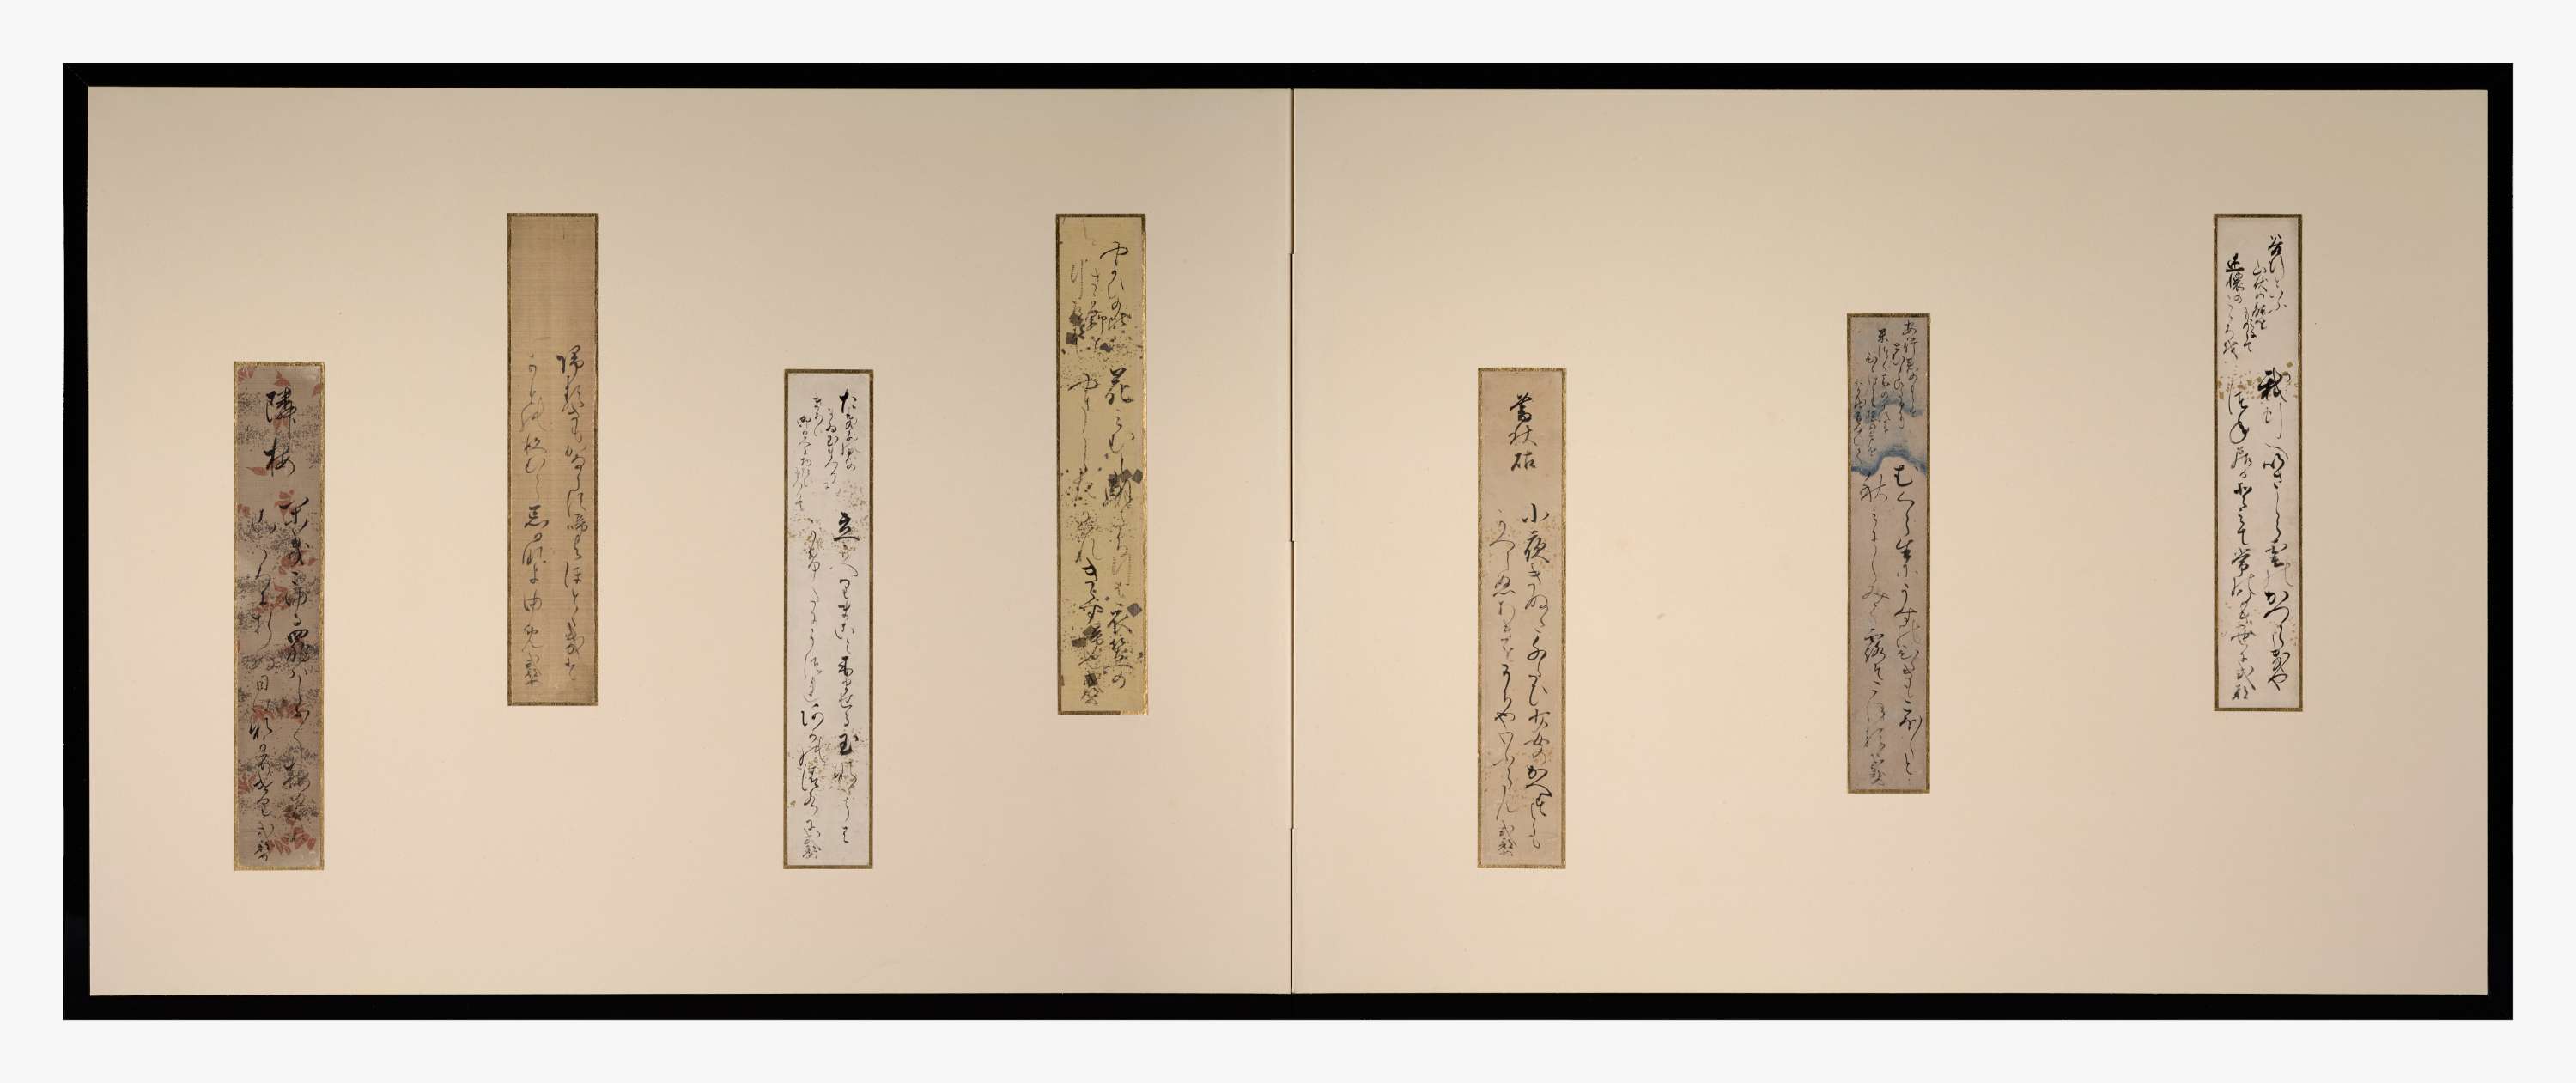 Seven decorated vertical paper slips with calligraphy mounted on a two-paneled folding screen at alternating heights.